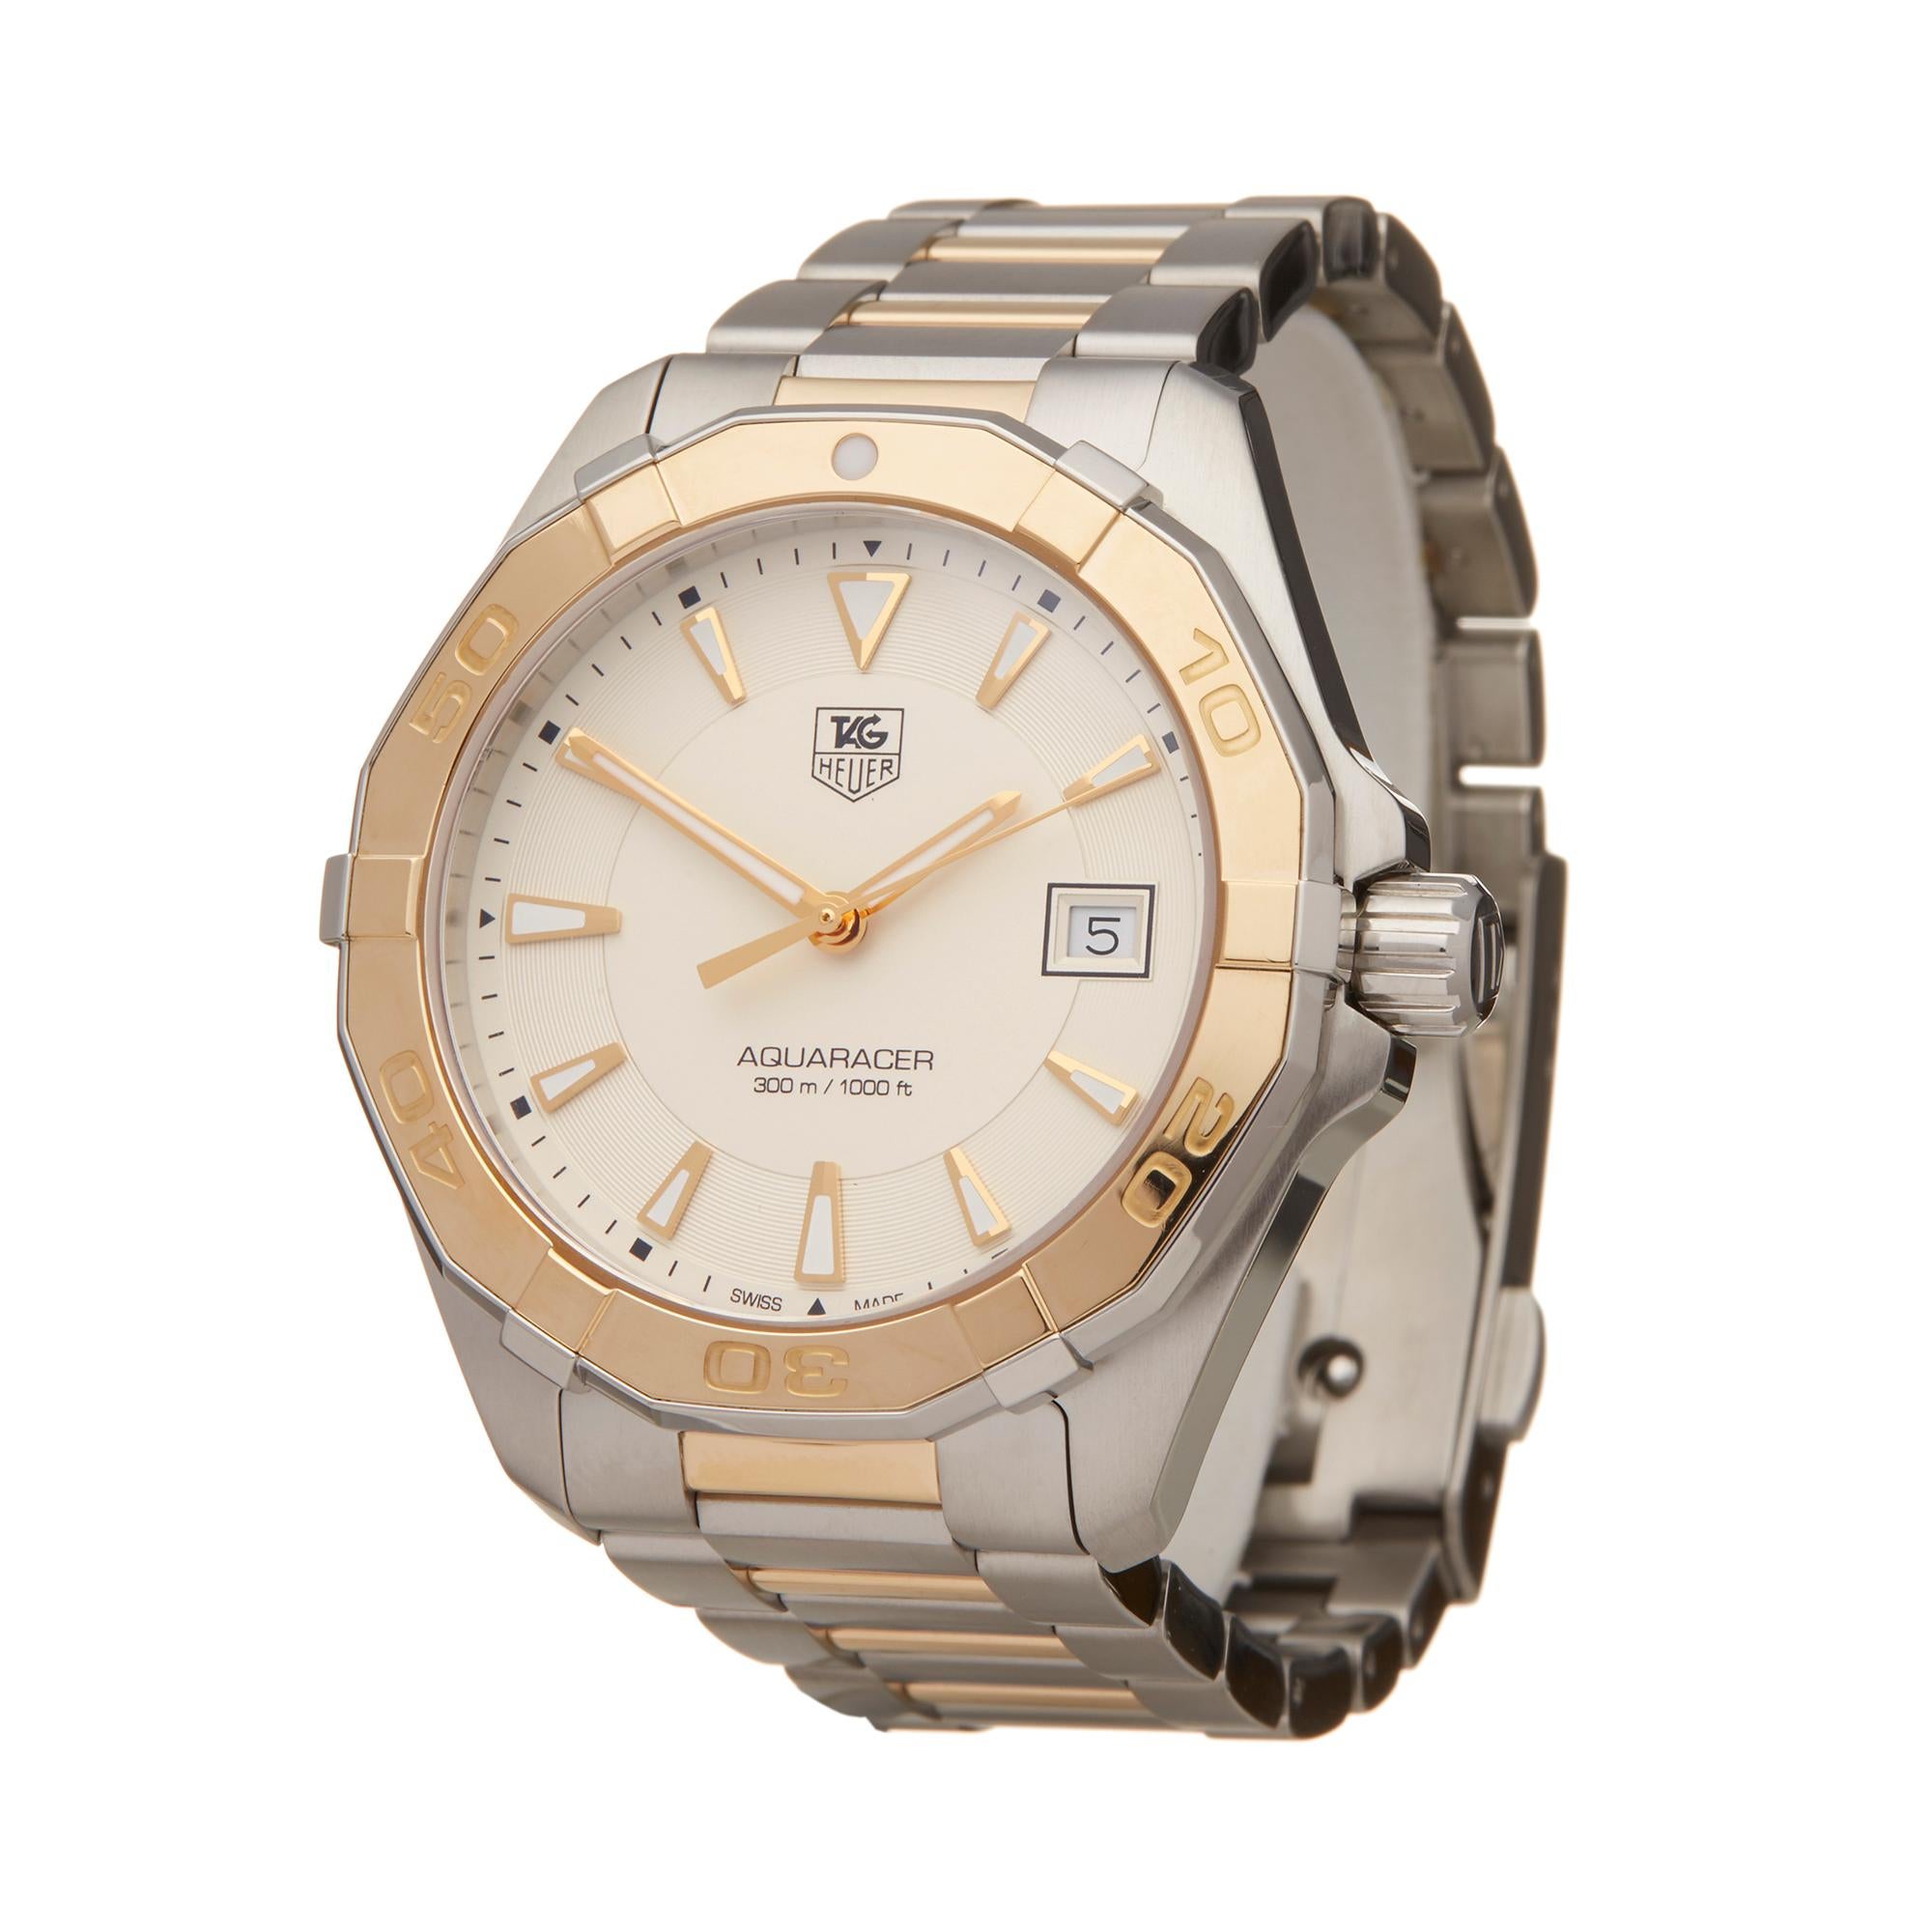 Reference: W5975
Manufacturer: Tag Heuer
Model: Aquaracer
Model Number: WAY1151.BD0912
Age: Circa 2010's
Gender: Men's
Box and Papers: Presentation Box and Guarantee
Dial: White Baton
Glass: Sapphire Crystal
Movement: Quartz
Water Resistance: To